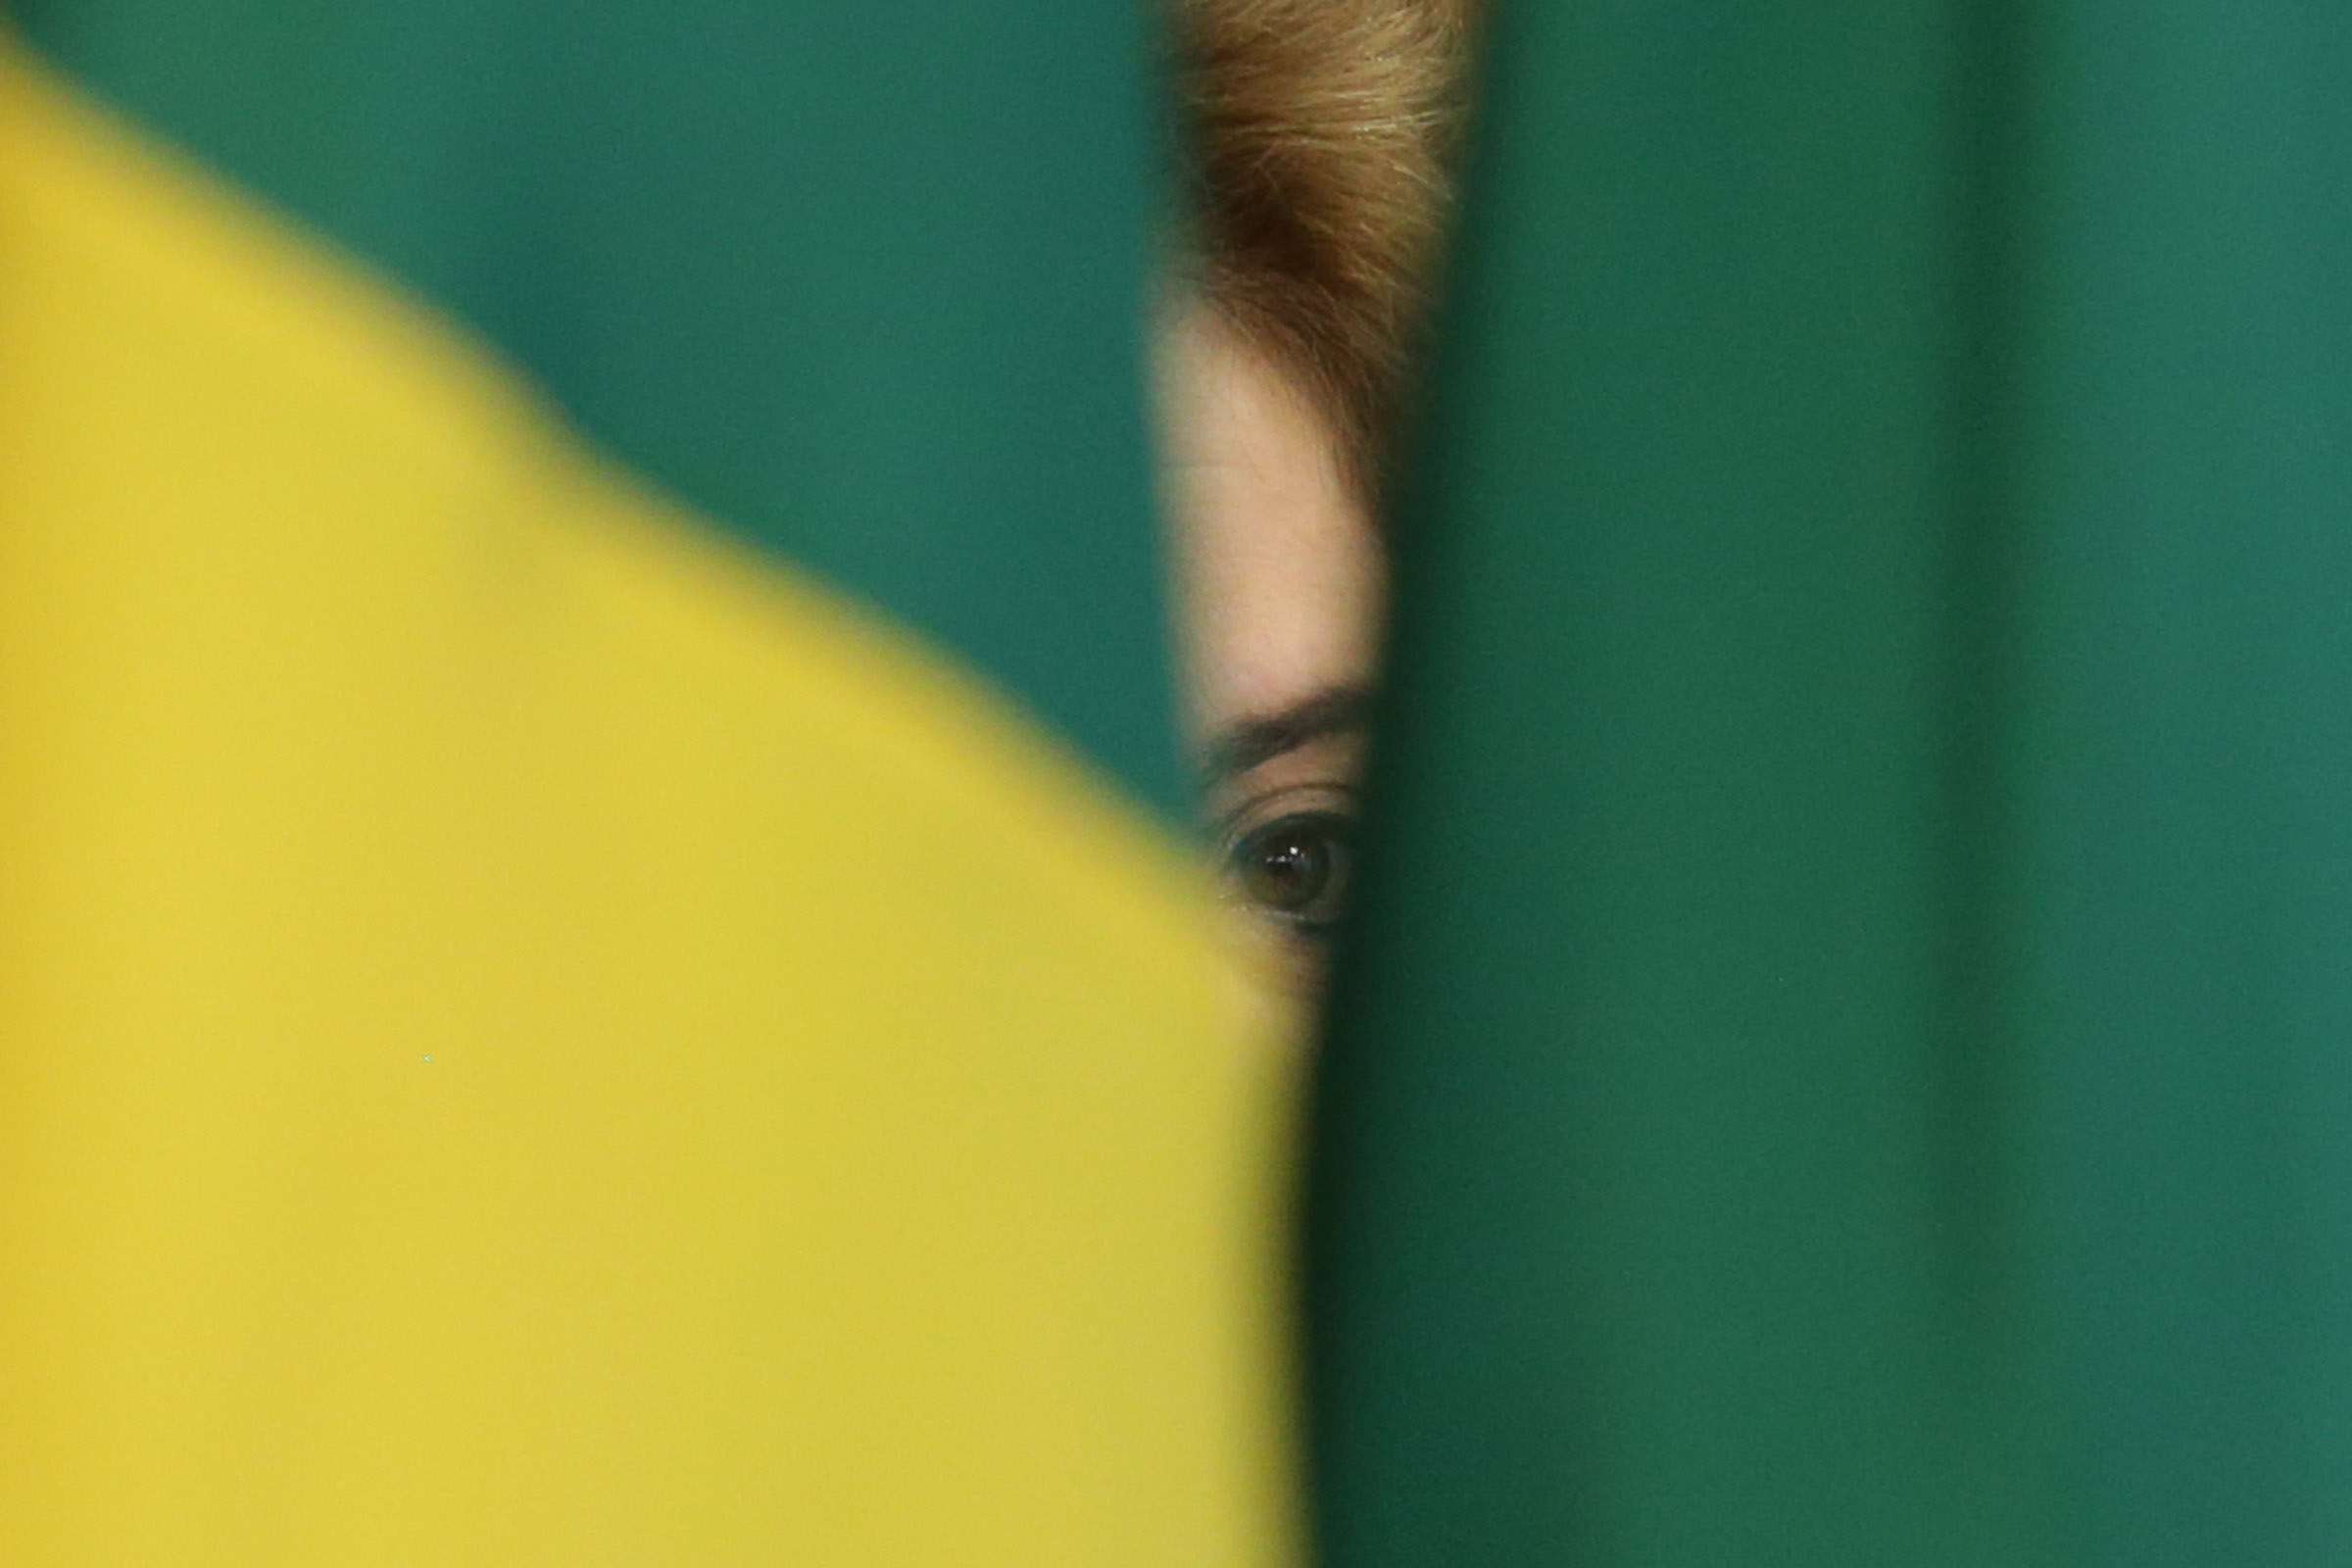 Brazil president Rousseff presents defense at impeachment trial